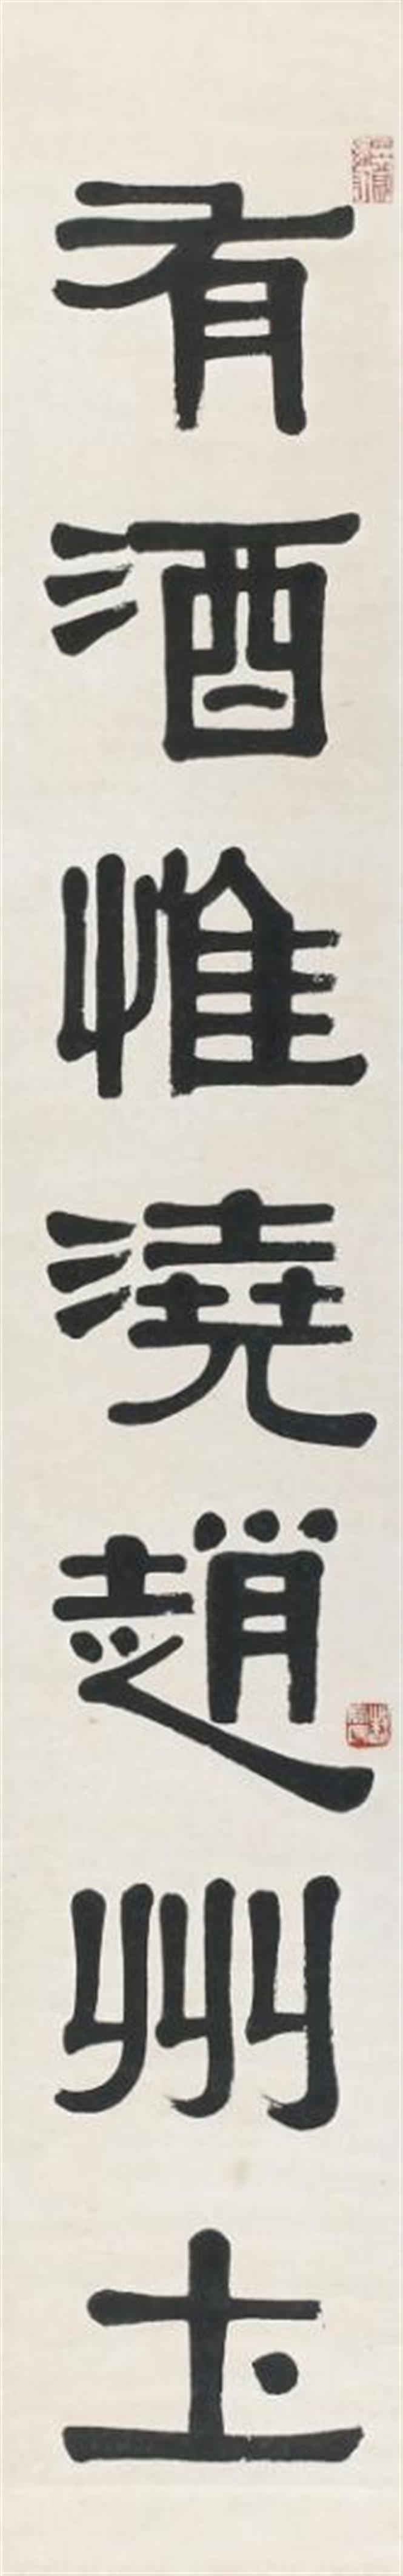 Deng Sanmu - Calligraphic couplet with a poem by Li He (790-816). Ink on paper. Inscription, sealed Sishi hou zuo, Fen gong si xi, Chu kuangren and one more seal. - image-1